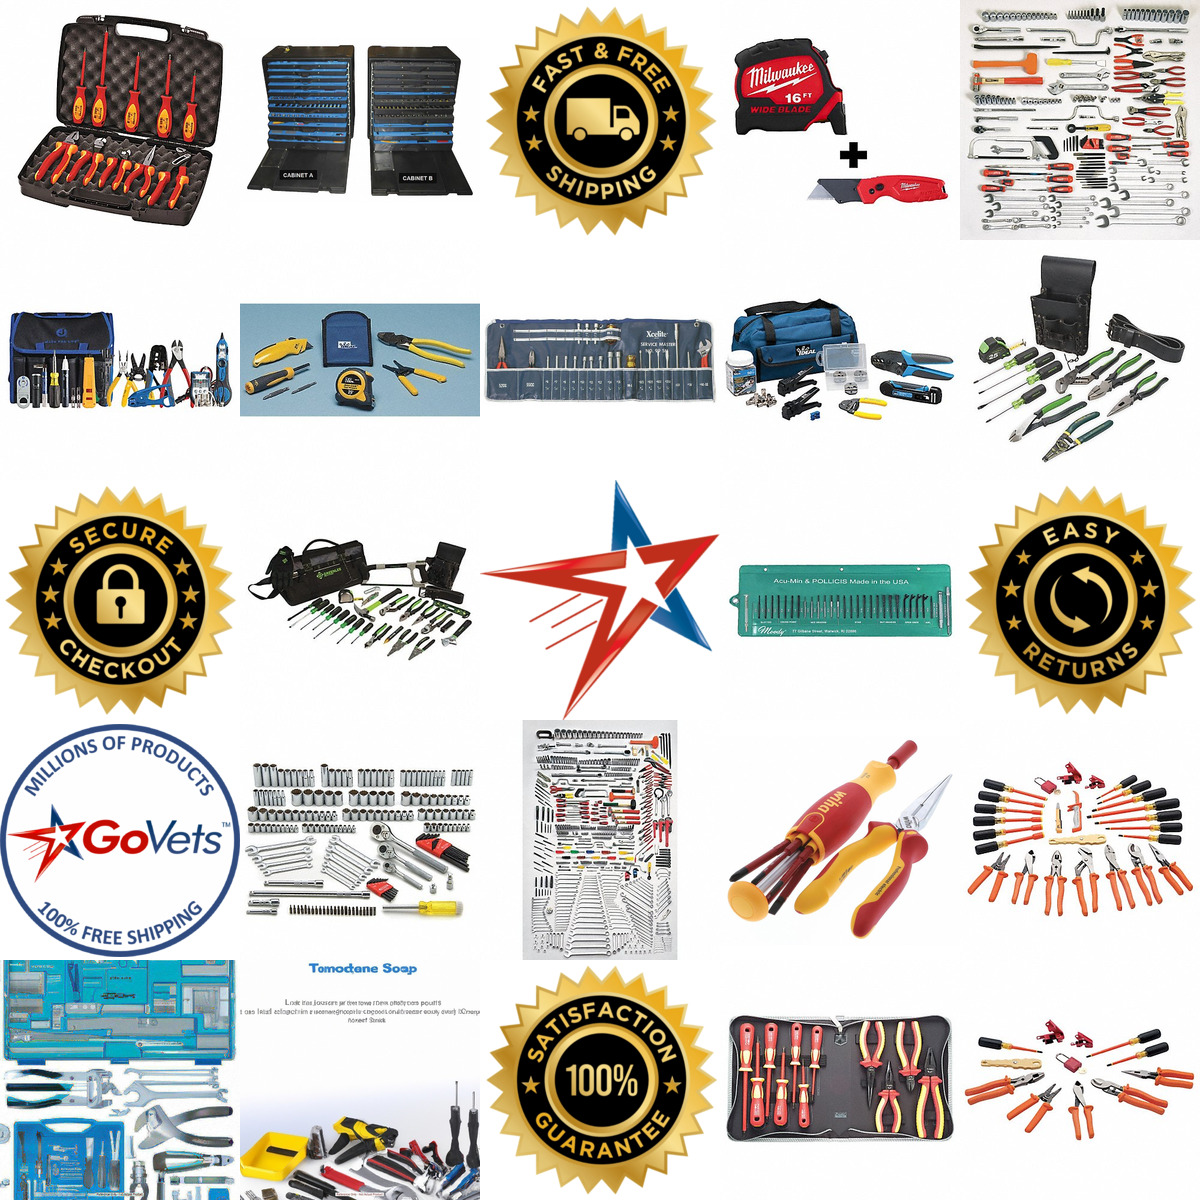 A selection of Hand Tool Kits products on GoVets